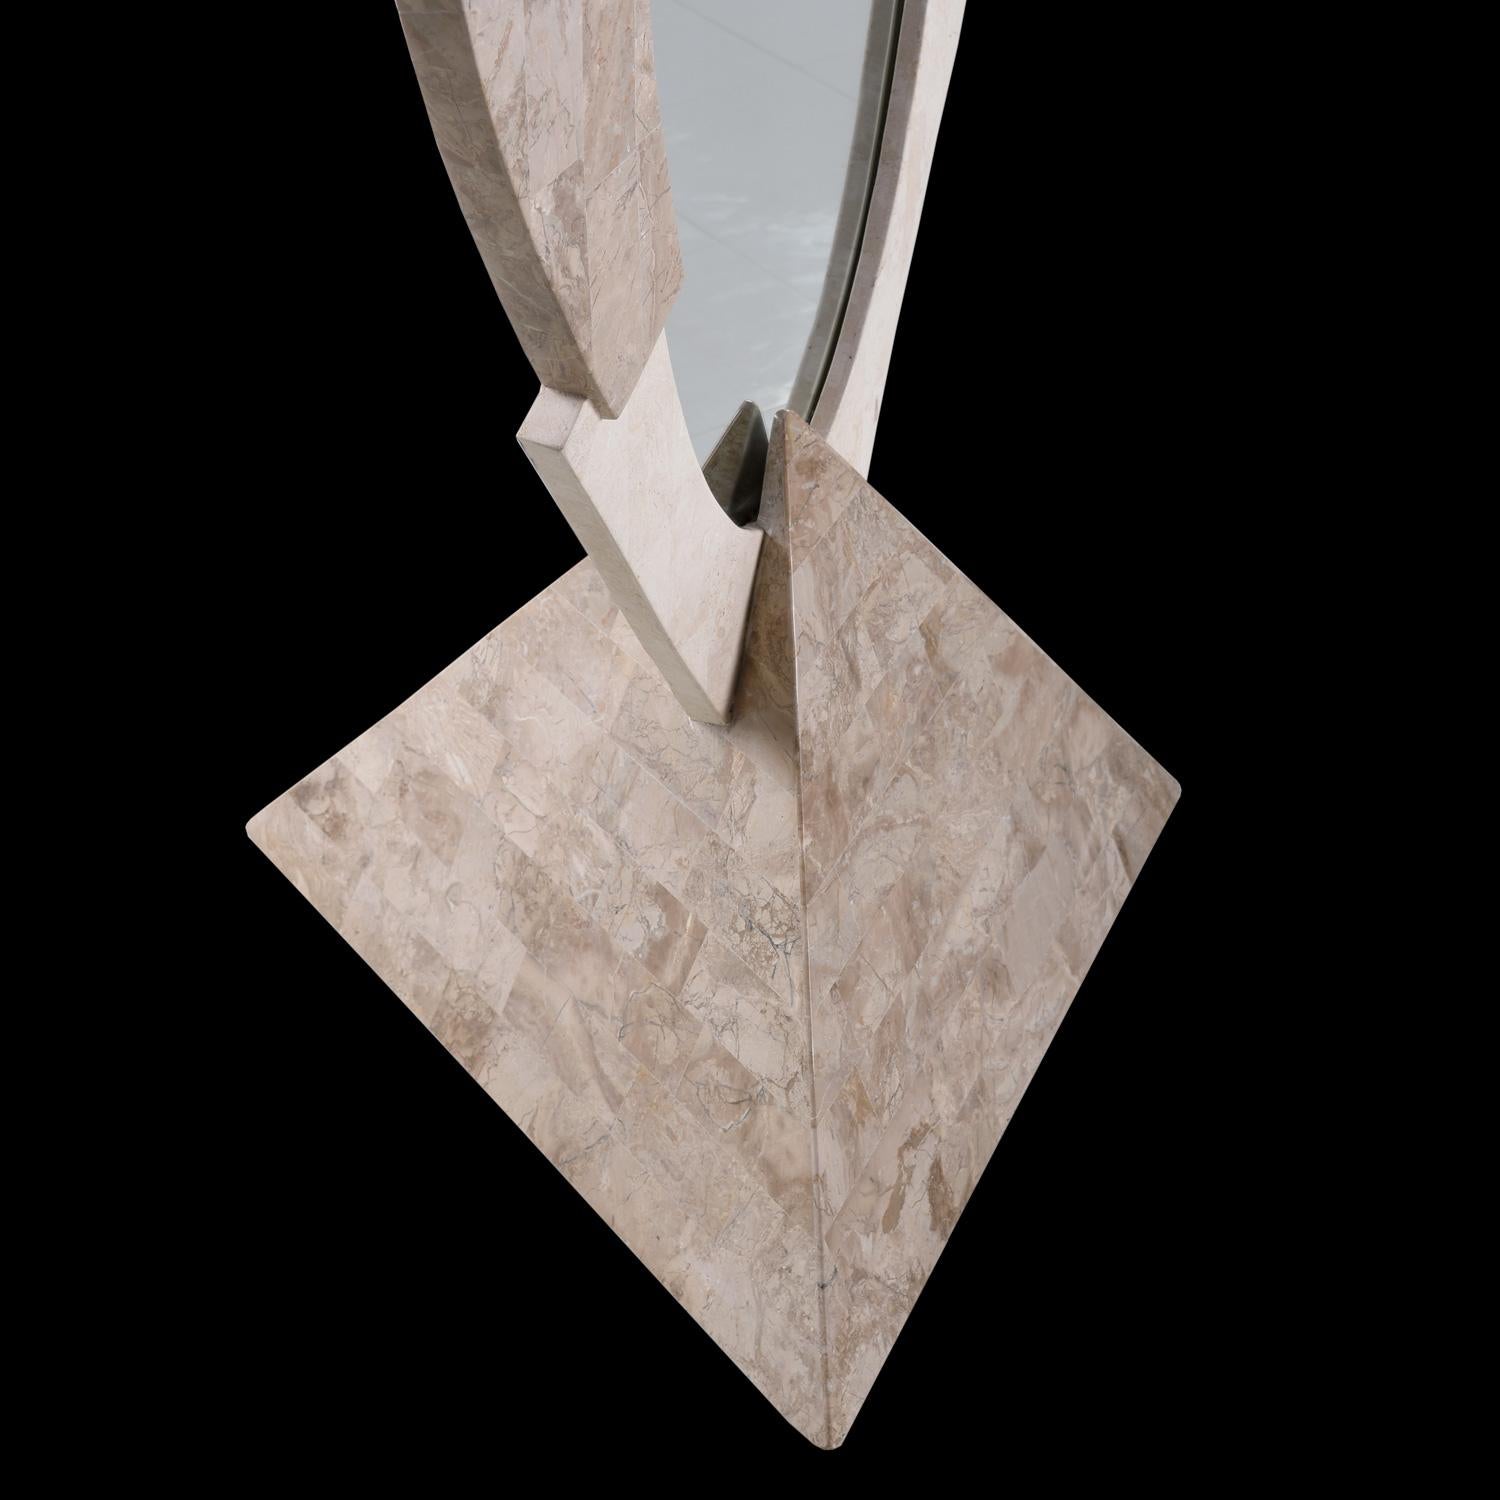 This pretty mirror is something fairy tales are made of. It boasts beautifully smooth and polished tessellated stone throughout and stands firmly on a stone carved pyramid. The multicolored stone and asymmetrical design give this piece a